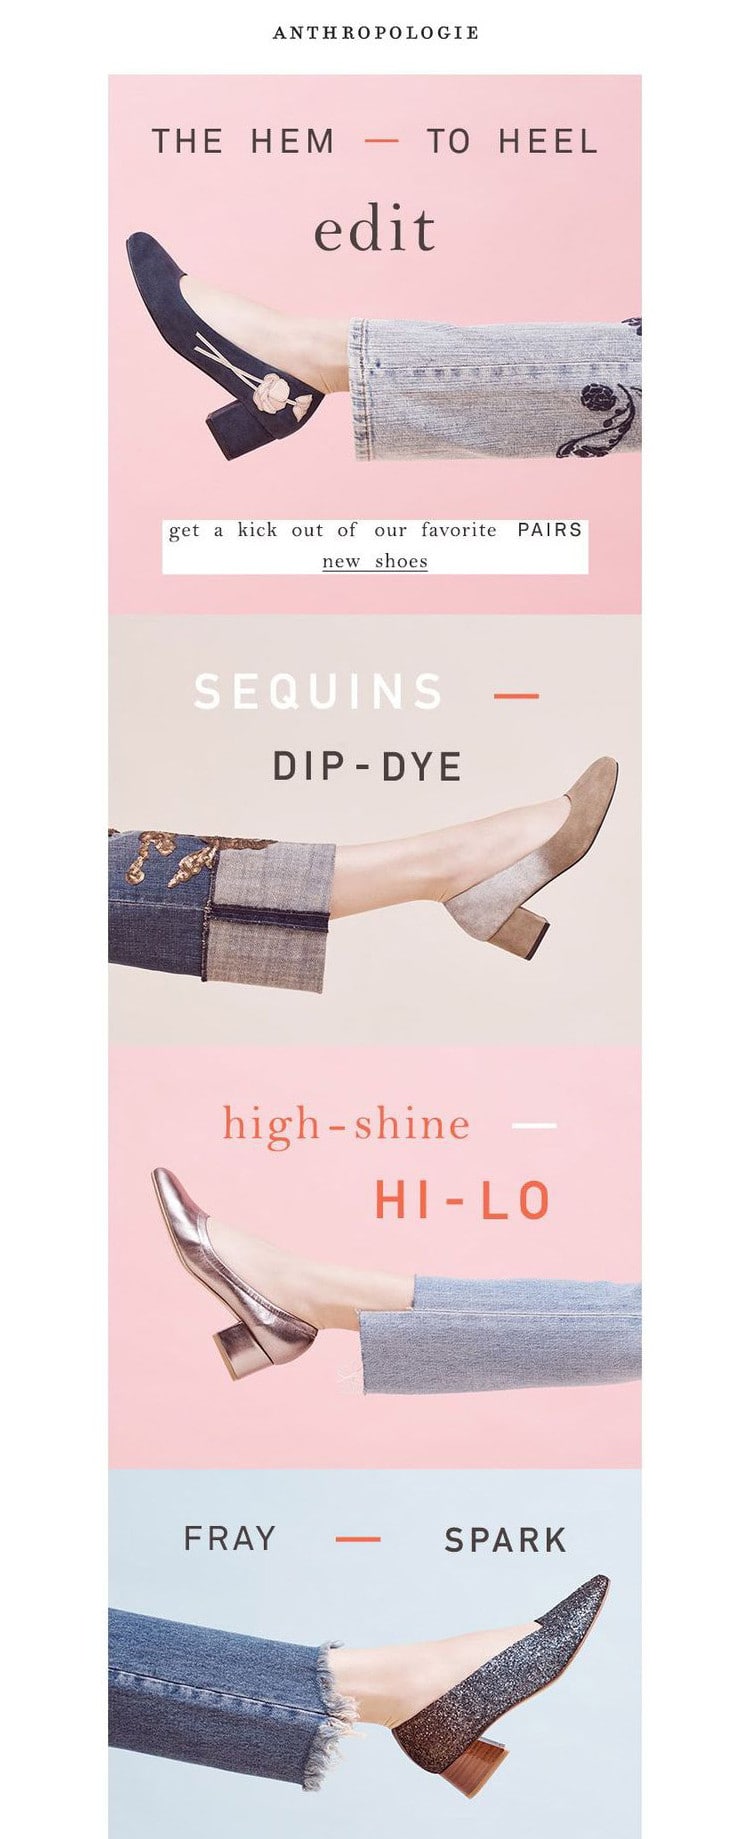 e-newletter email newsletter marketing design layout inspiration anthropologie fashion shoes youthful fun pink